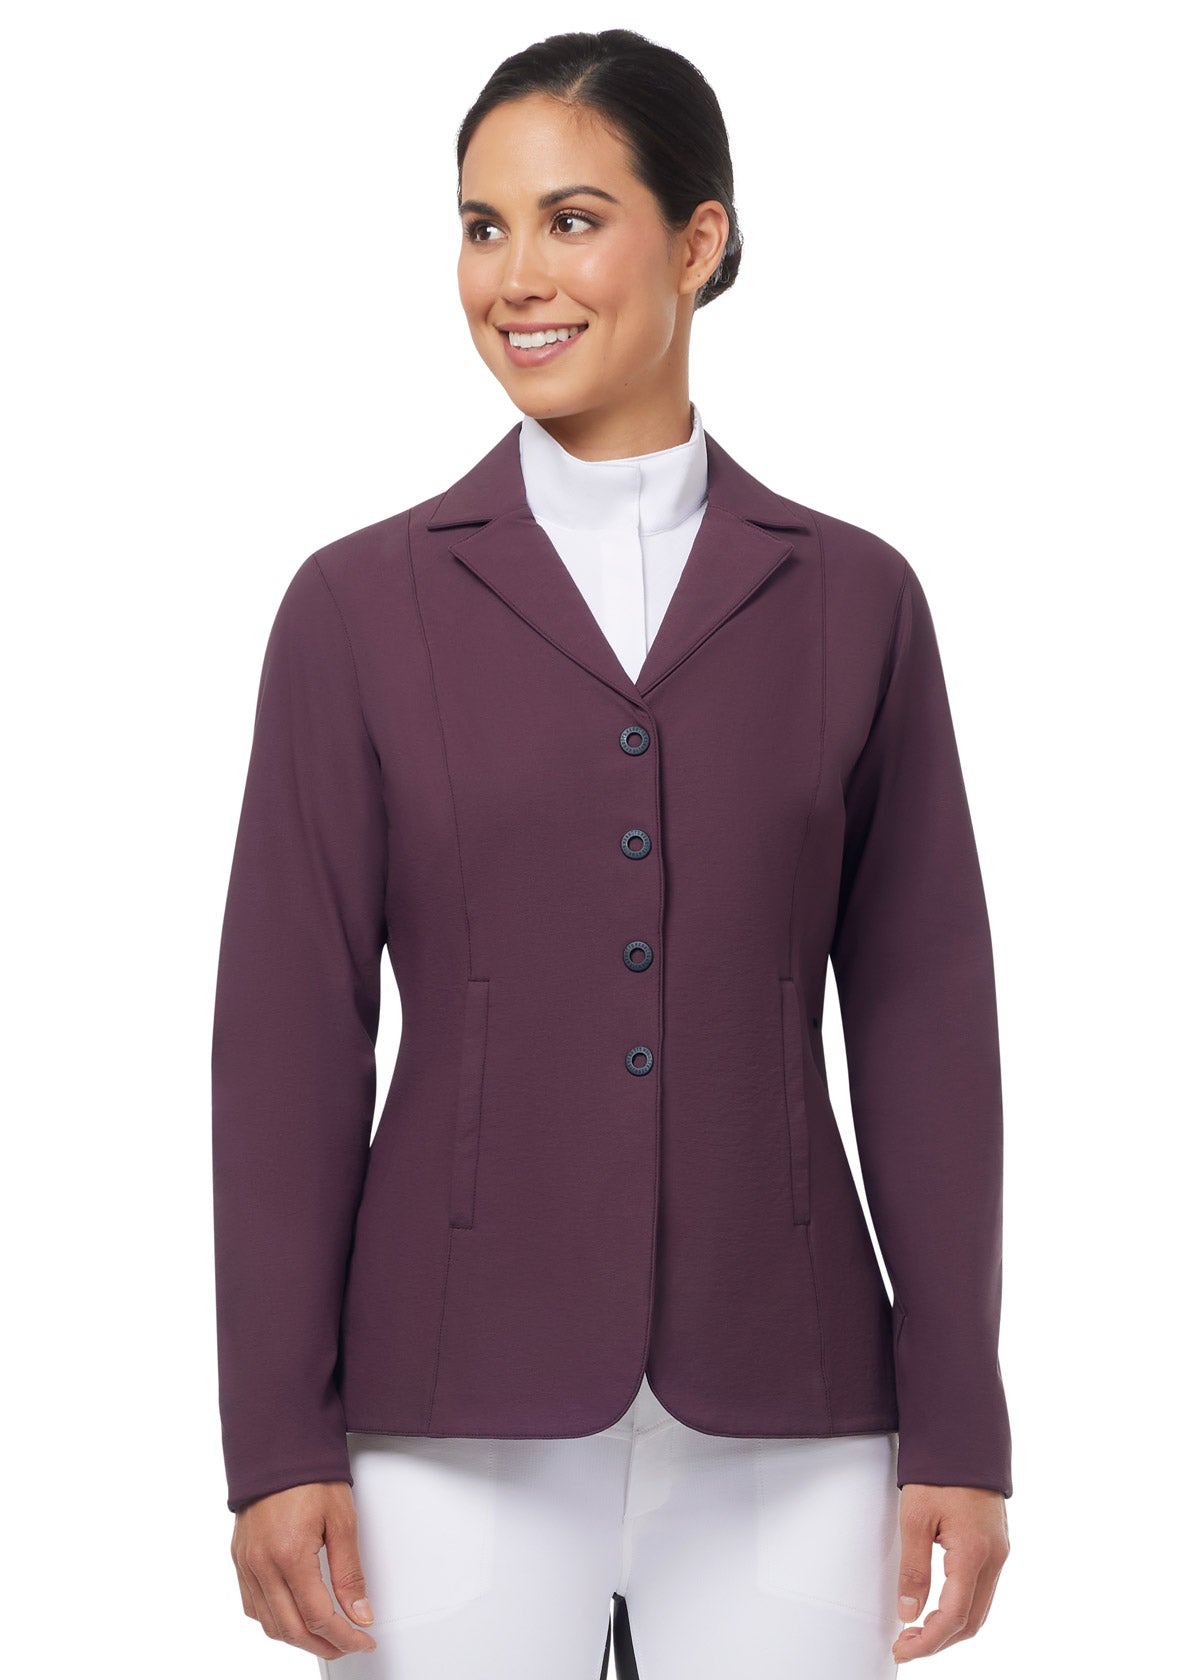 Plus Size Show Clothing  Plus Size show Breeches & Jackets – Page